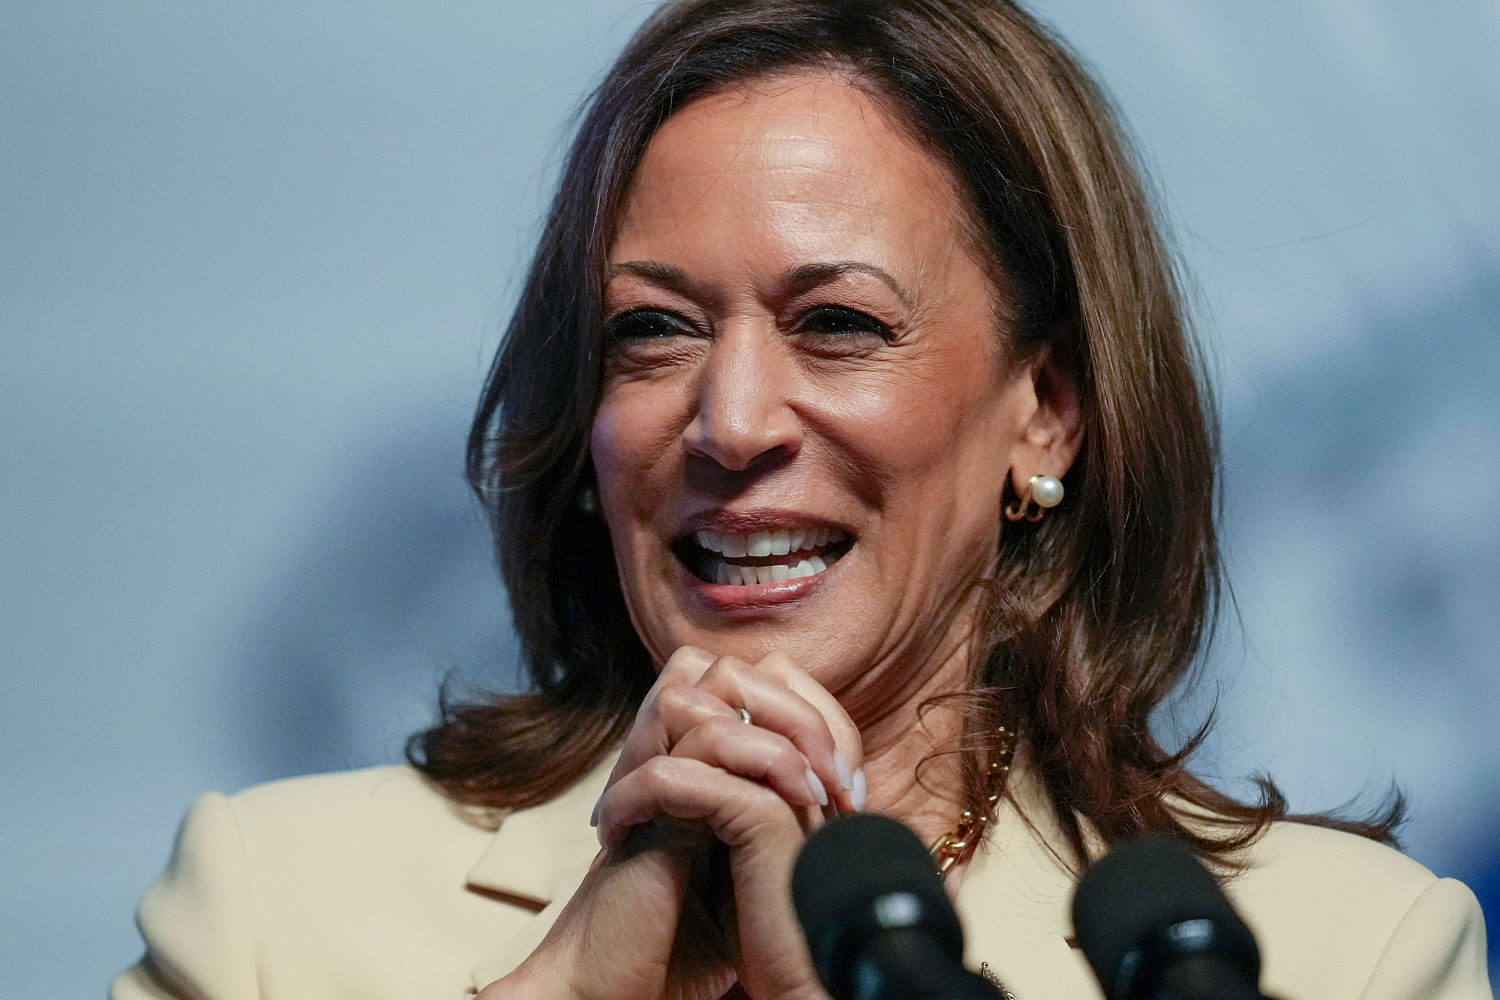 Harris officially has no challengers for the Democratic presidential nomination